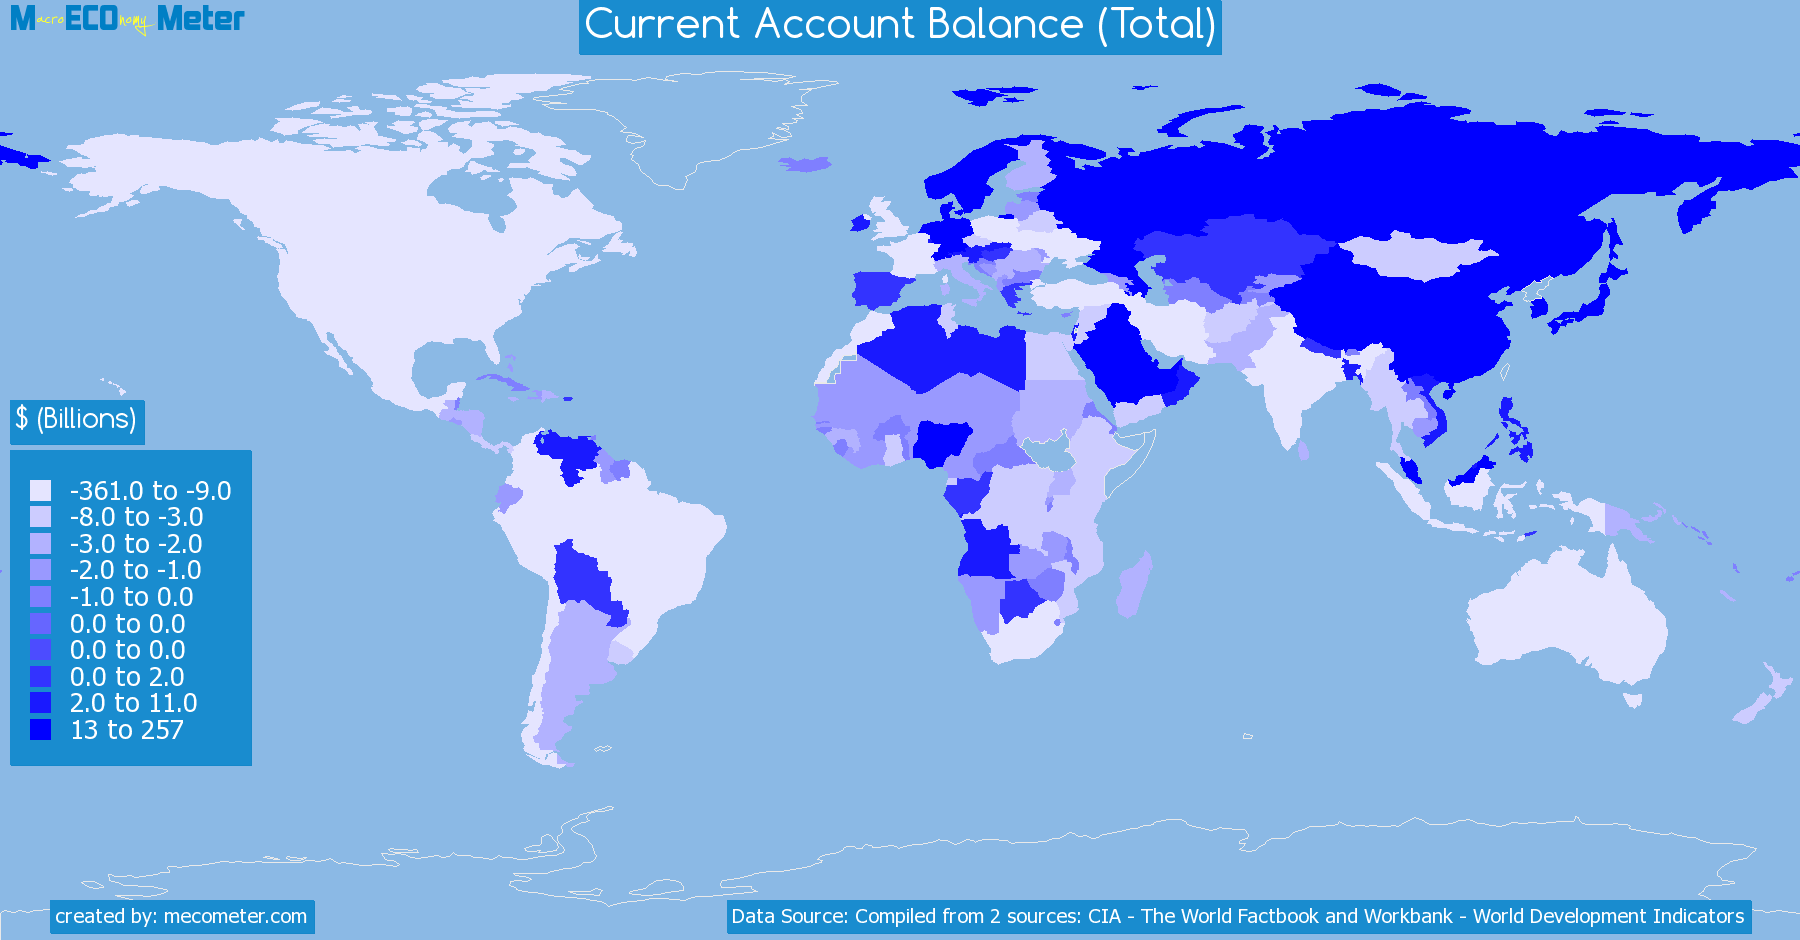 Worldmap of all countries colored to reflect the values of Current Account Balance (Total)